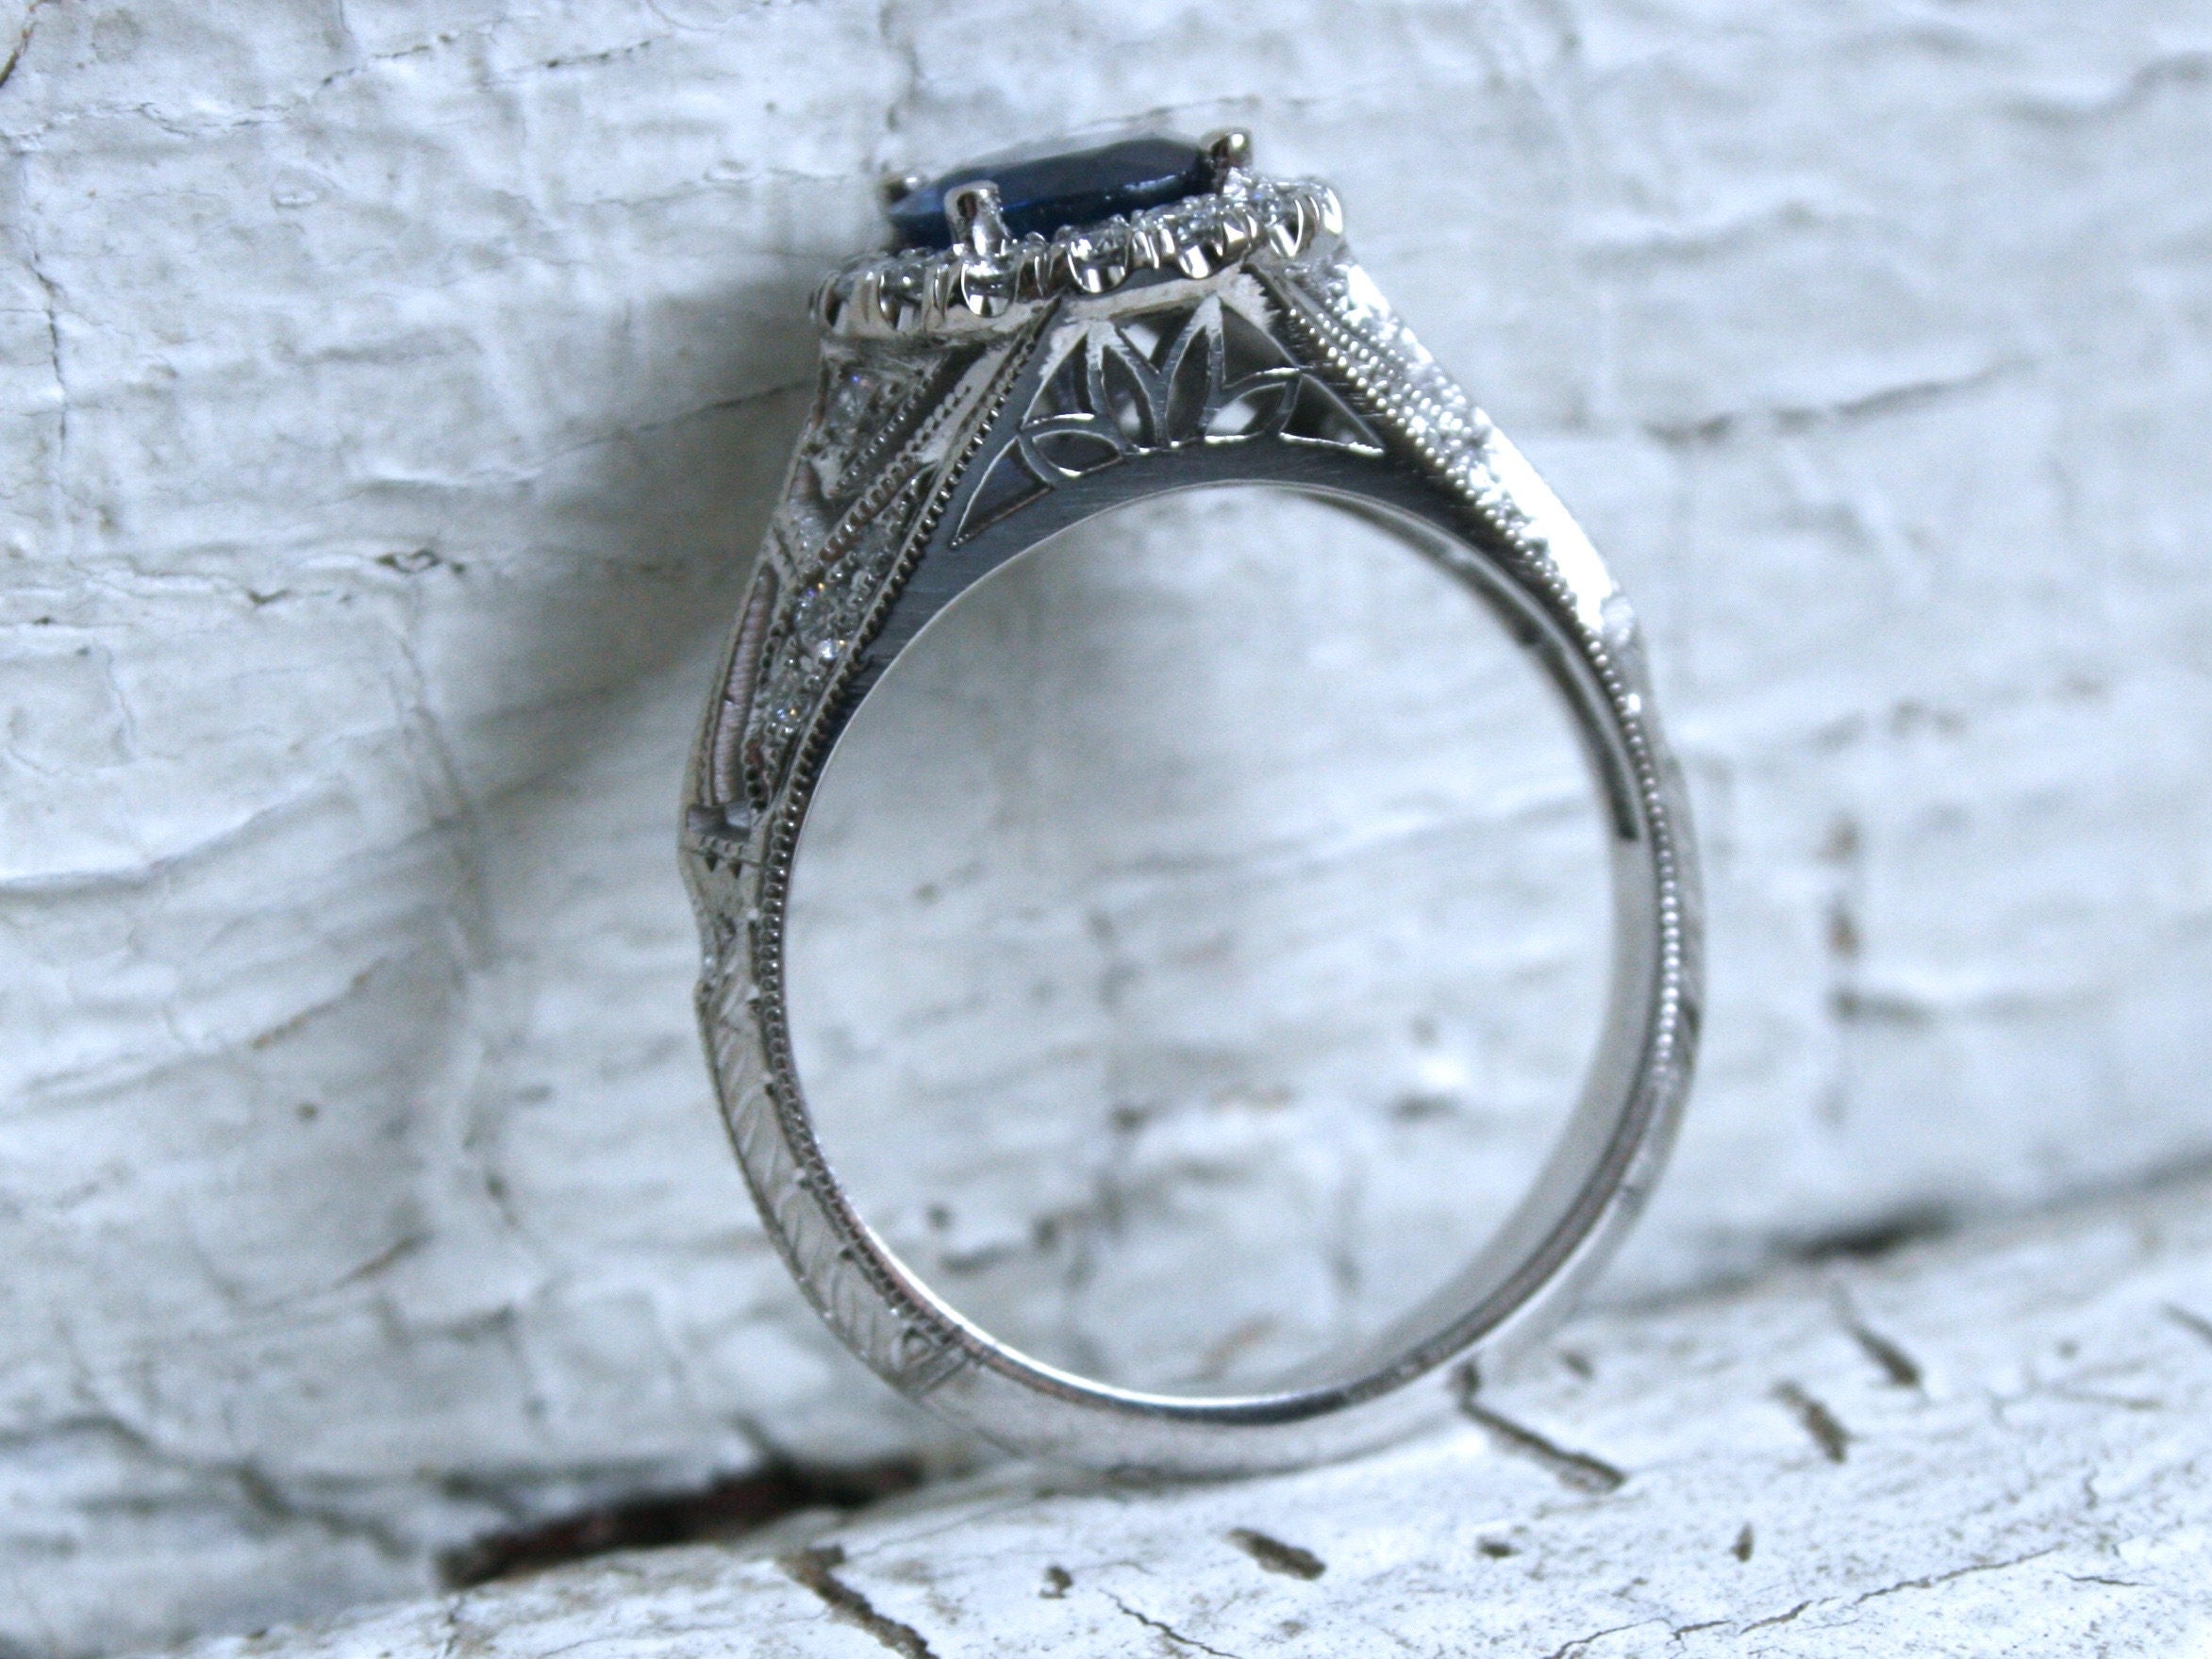 Vintage Inspired Halo Diamond and Natural Sapphire Ring Engagement Ring.